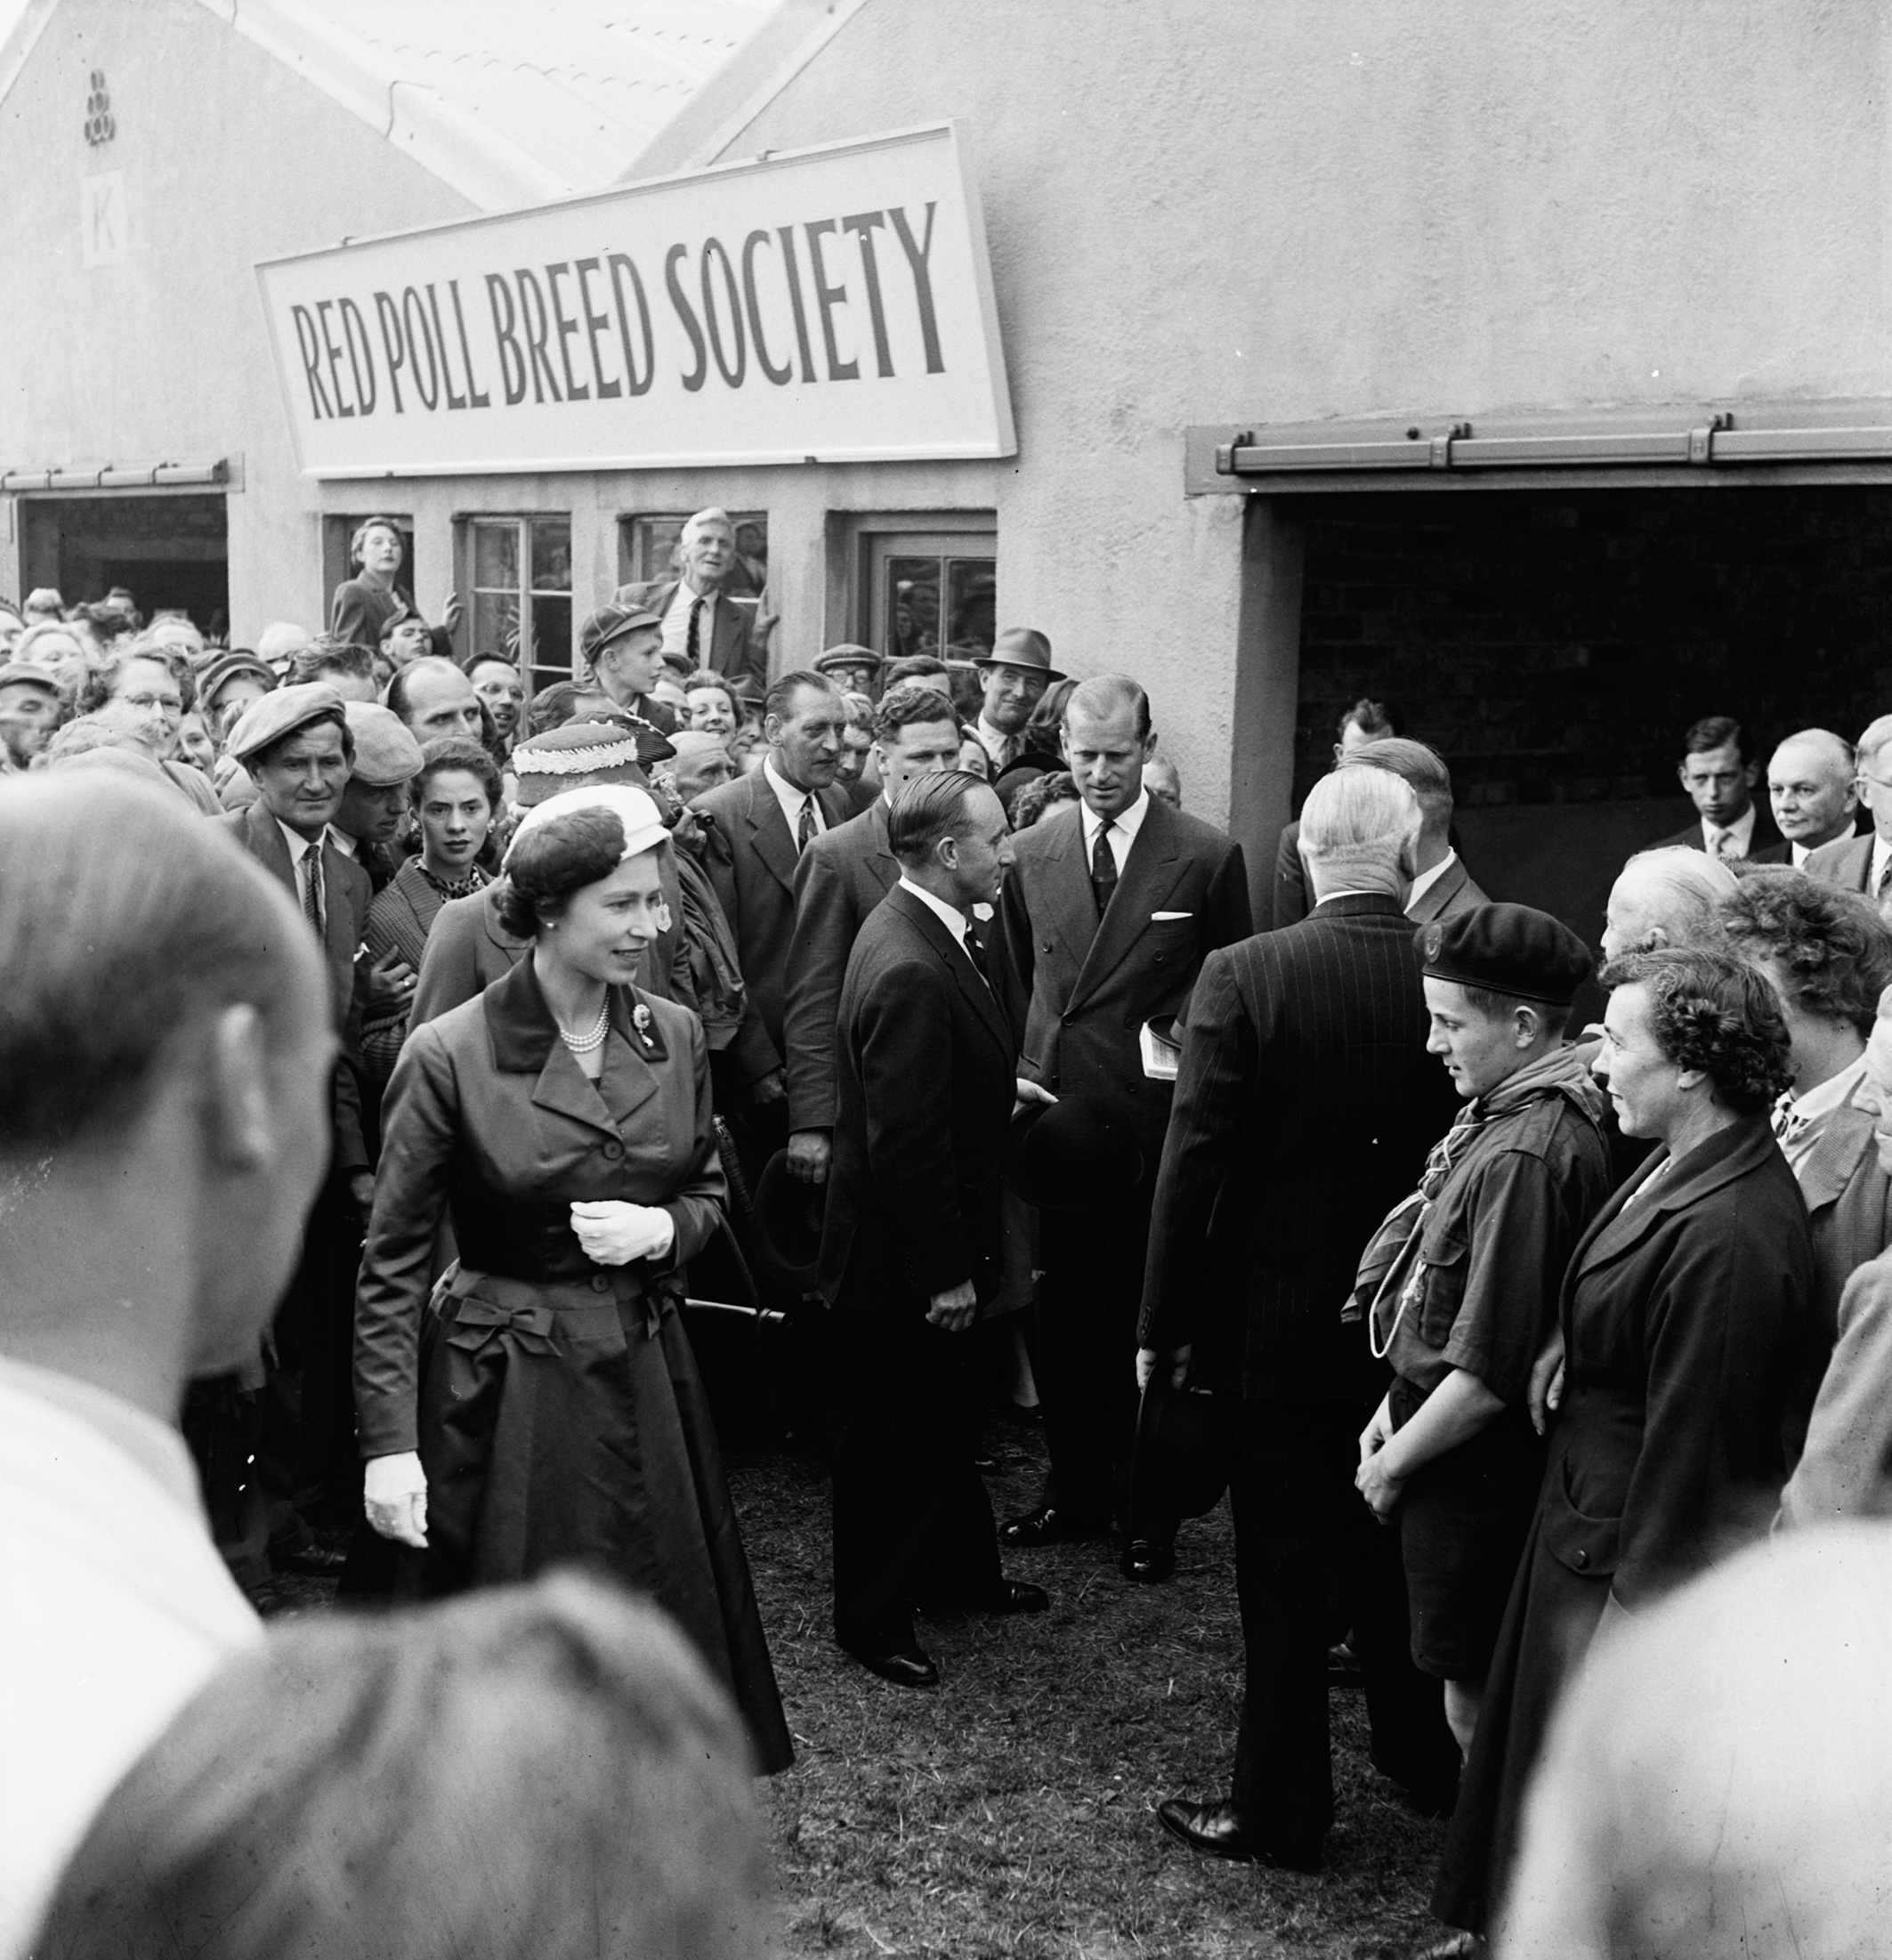 The Queen and Prince Philip at the Red Poll Breed Society tent at the show, also in 1957.